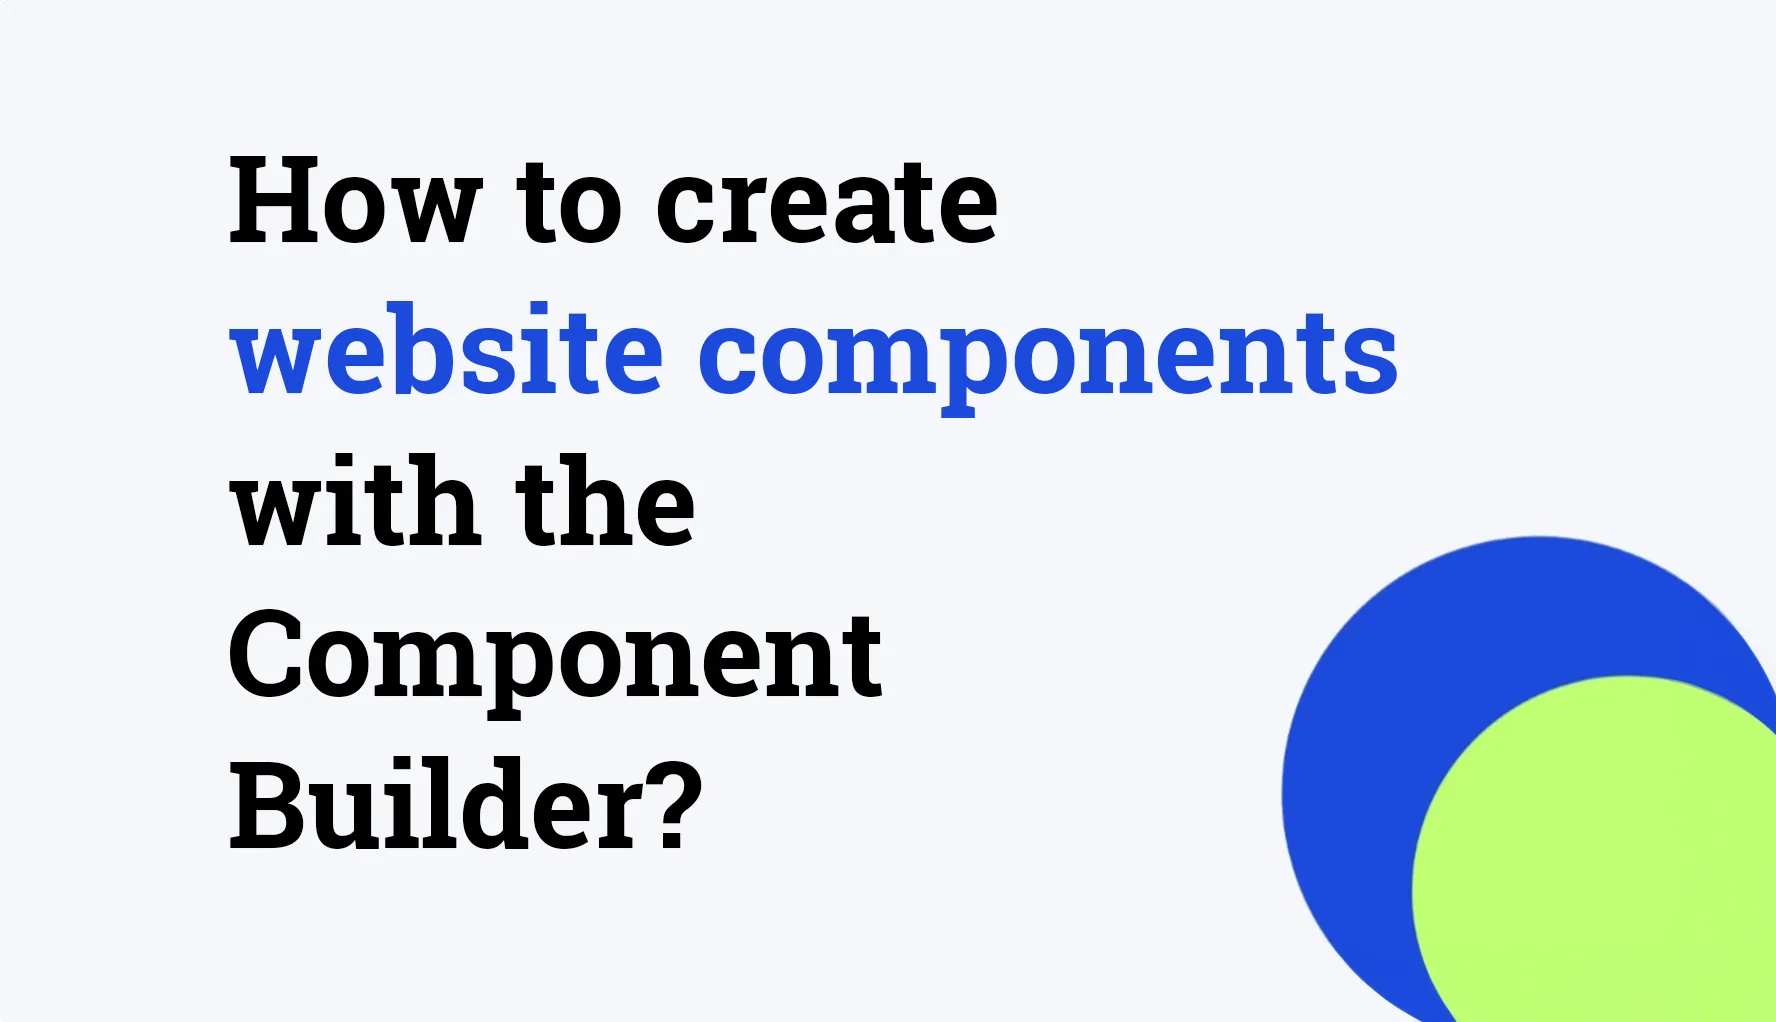 How to create website components with the Component Builder?